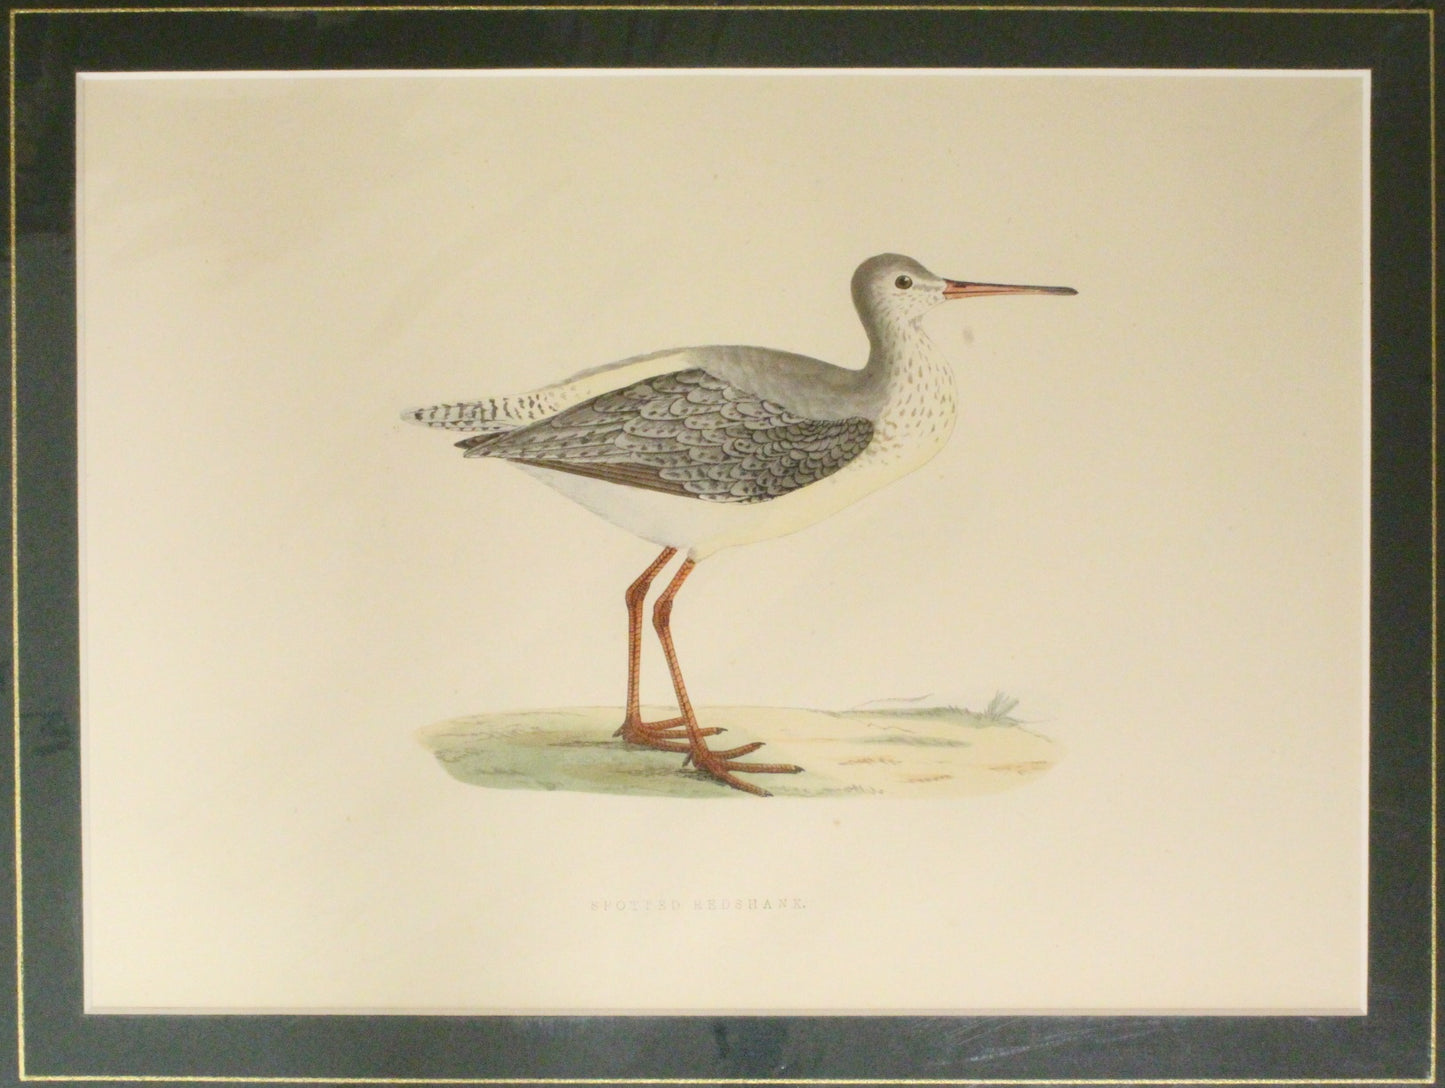 Bird: Morris, Rev Francis Orpen, Spotted Redshank, c1870, Matted